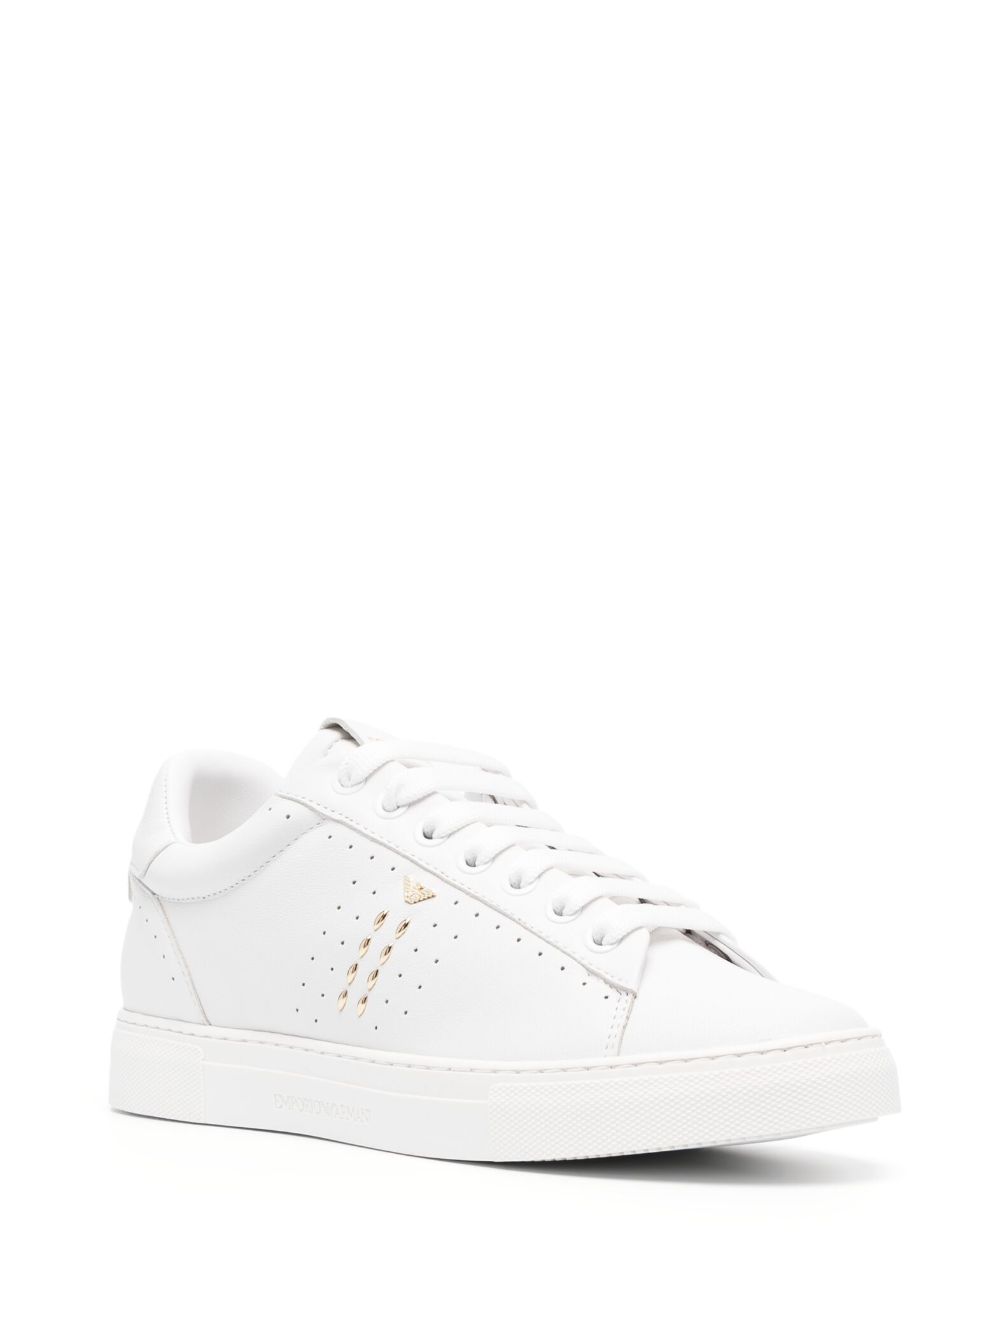 Emporio Armani lace-up low-top Sneakers - Farfetch